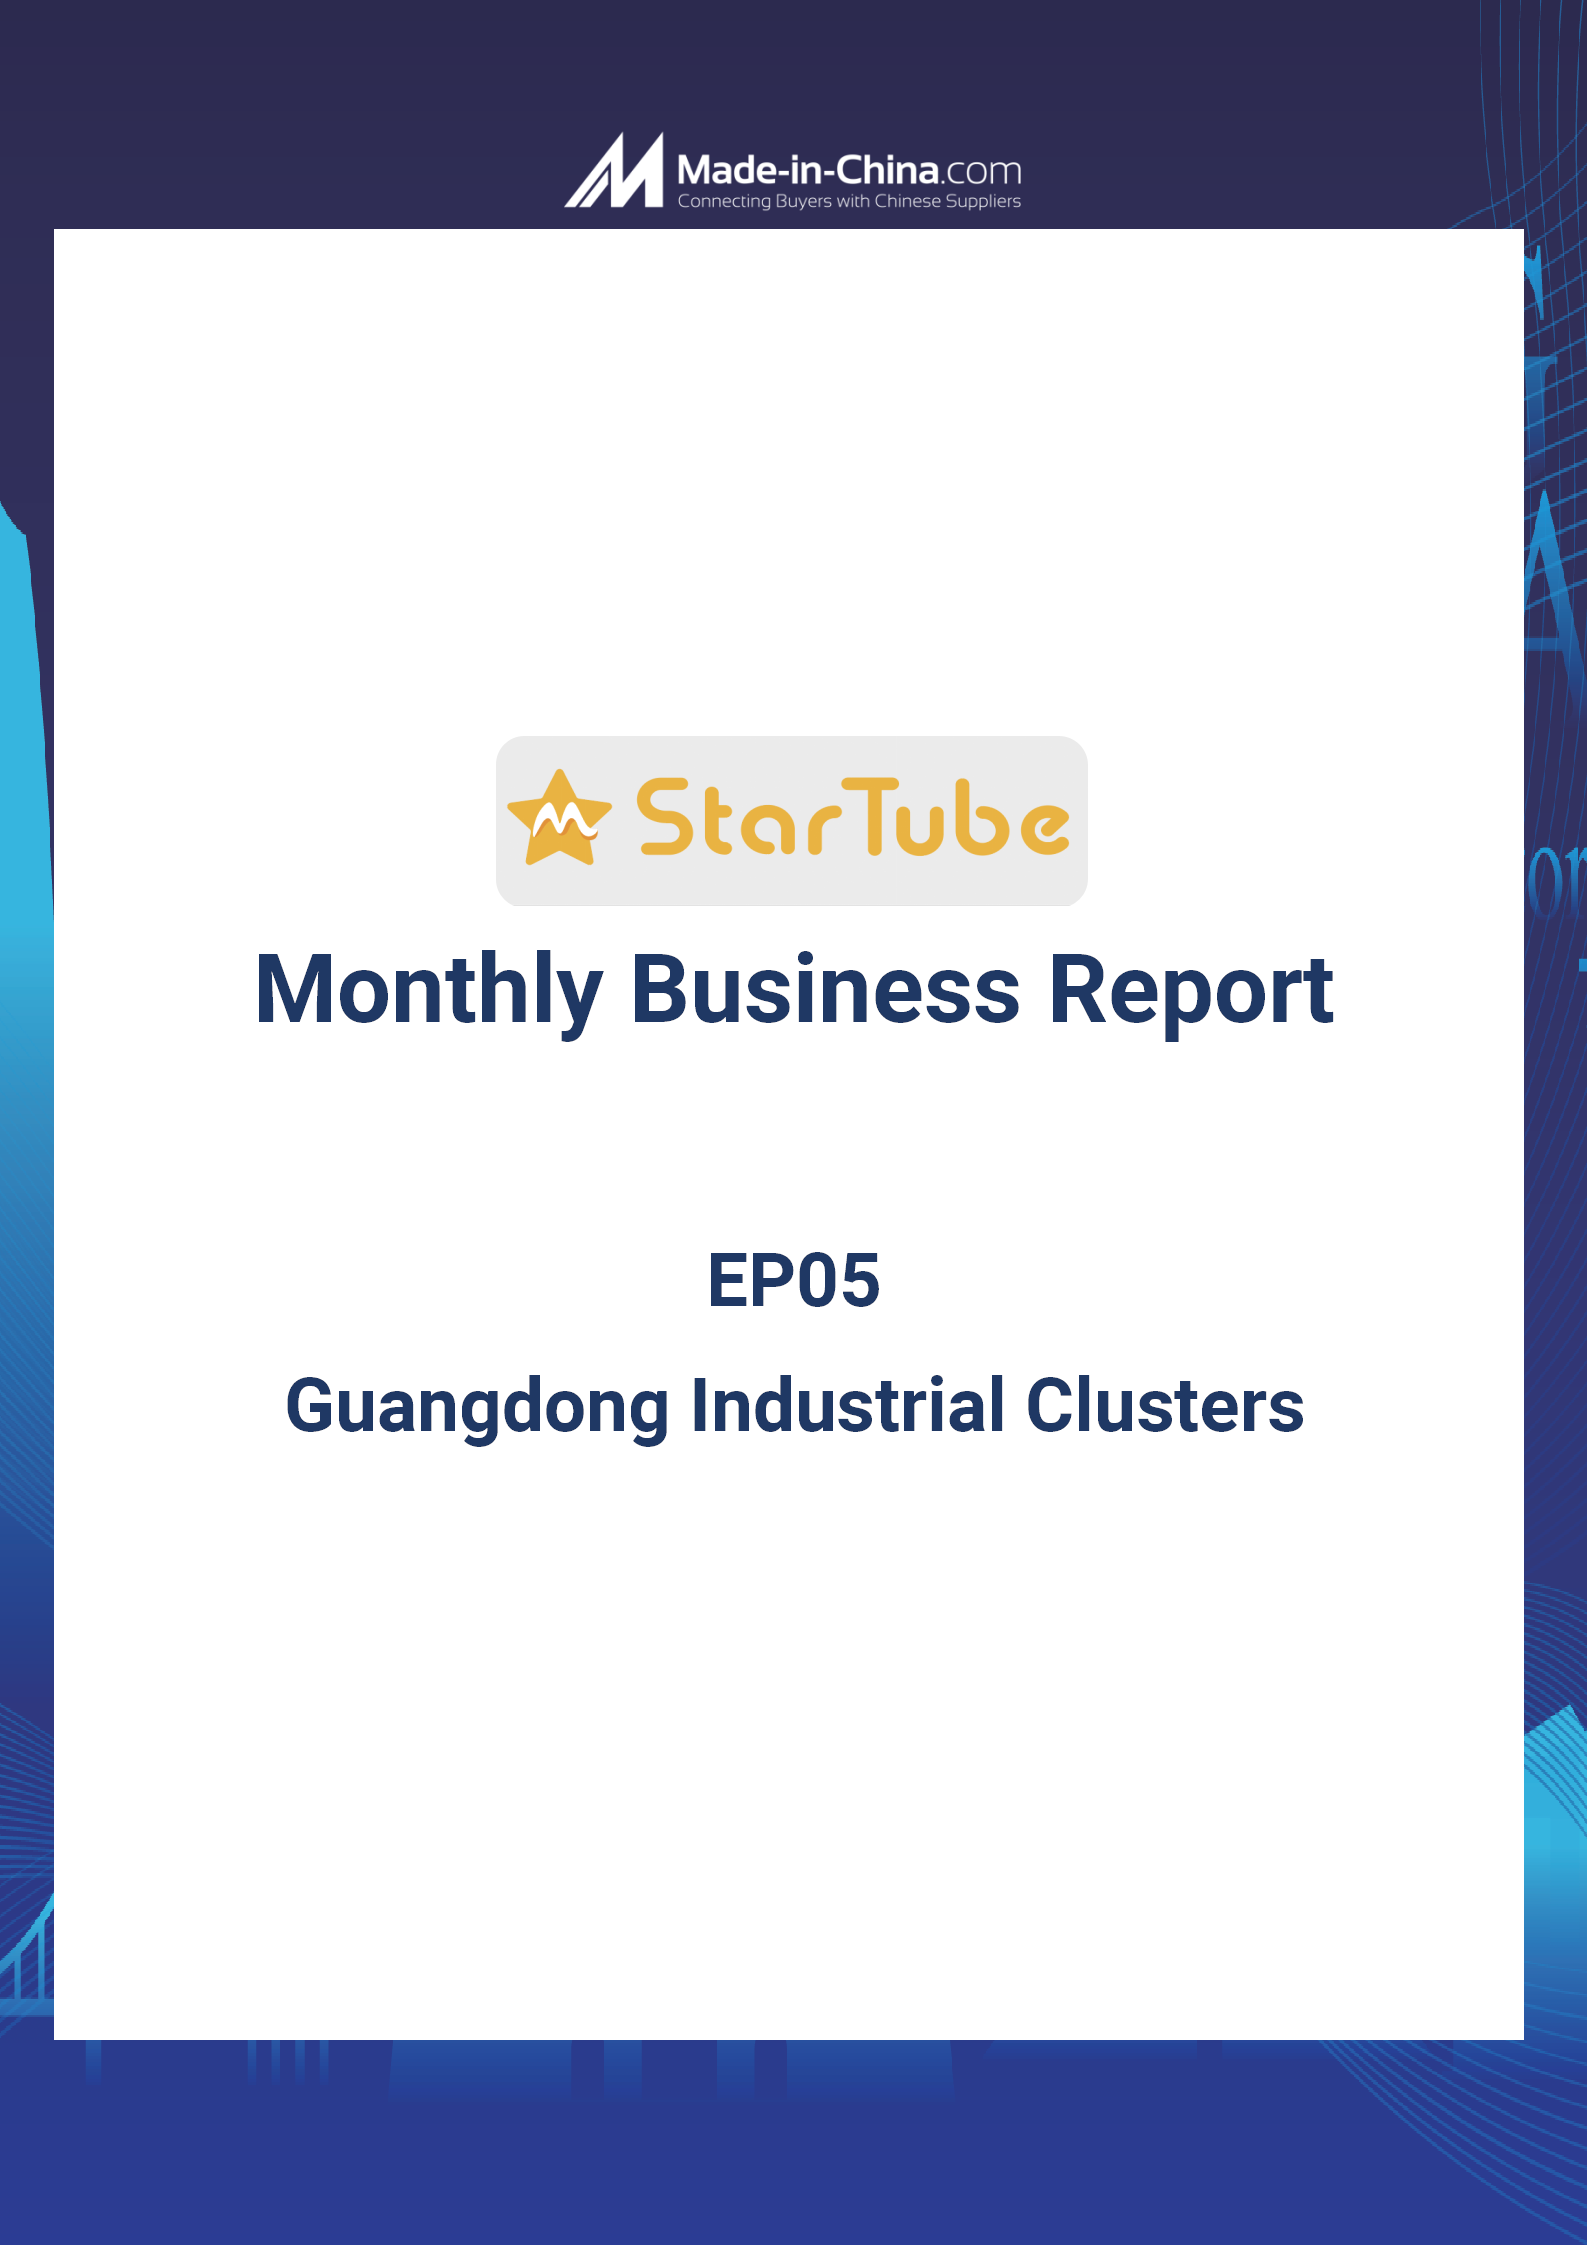 StarTube: Monthly Business Report EP05 Guangzhou Industrial Clusters_1